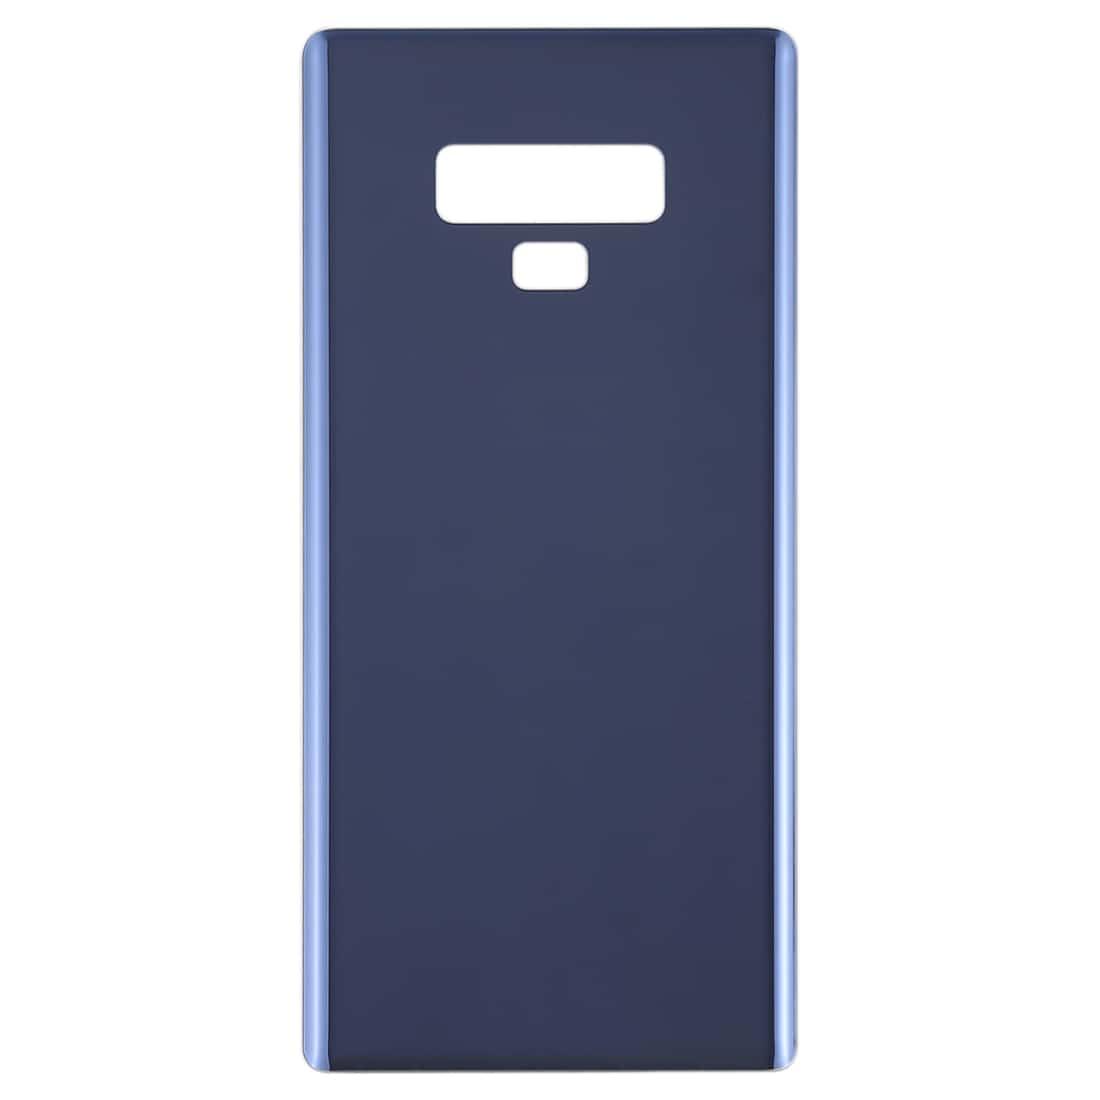 Back Glass Panel for  Samsung Galaxy Note 9 Blue